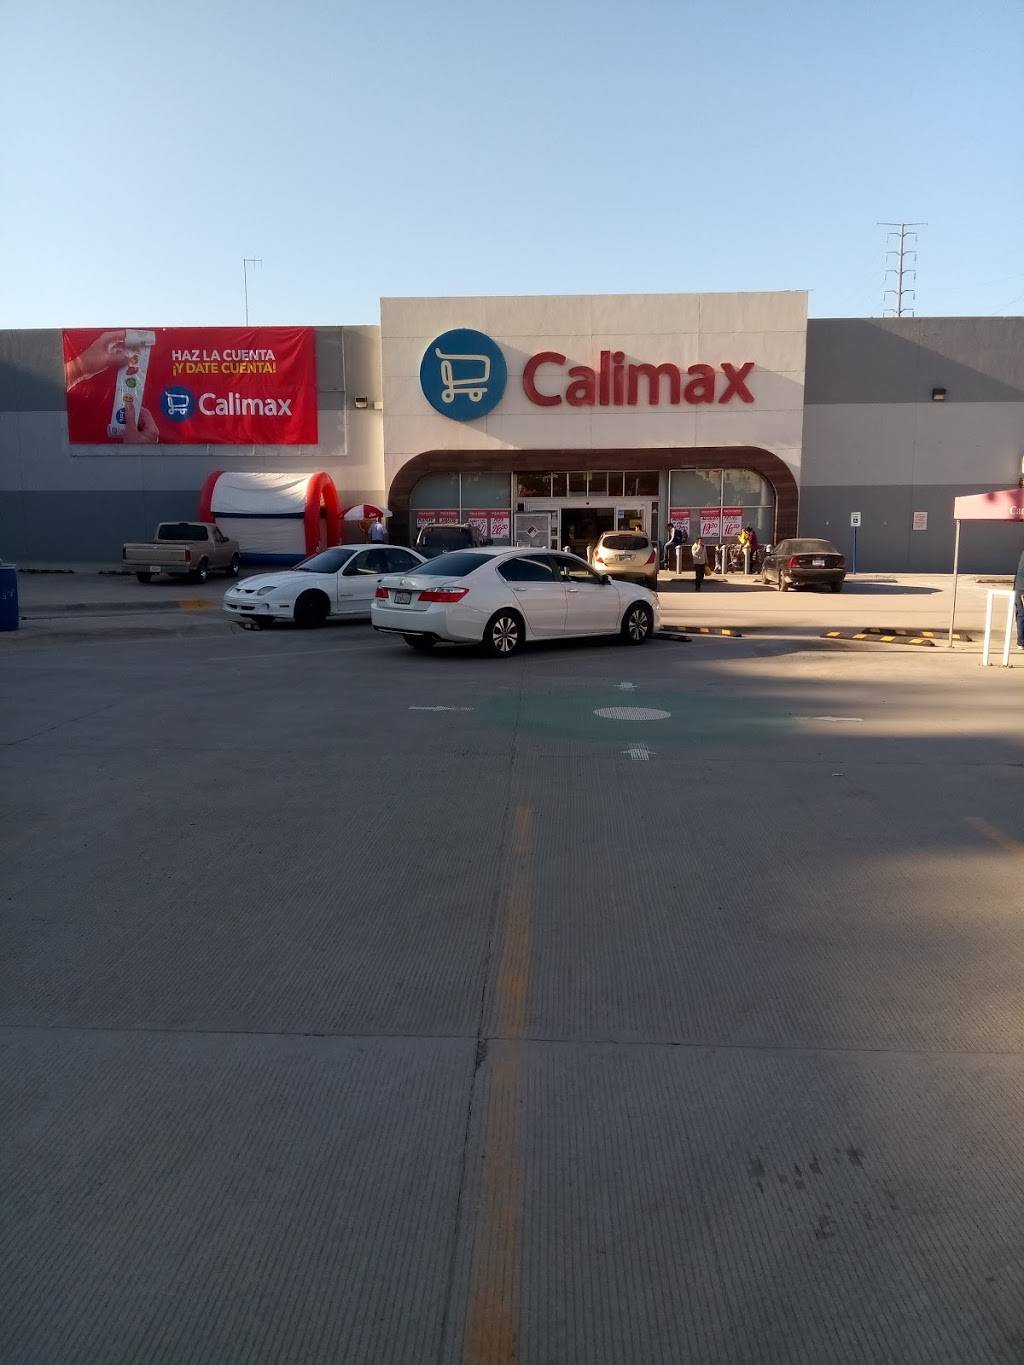 Calimax Pacifico | Calle Pacifico 8925, Industrial Pacifico, 22644 Tijuana, B.C., Mexico | Phone: 664 660 6309